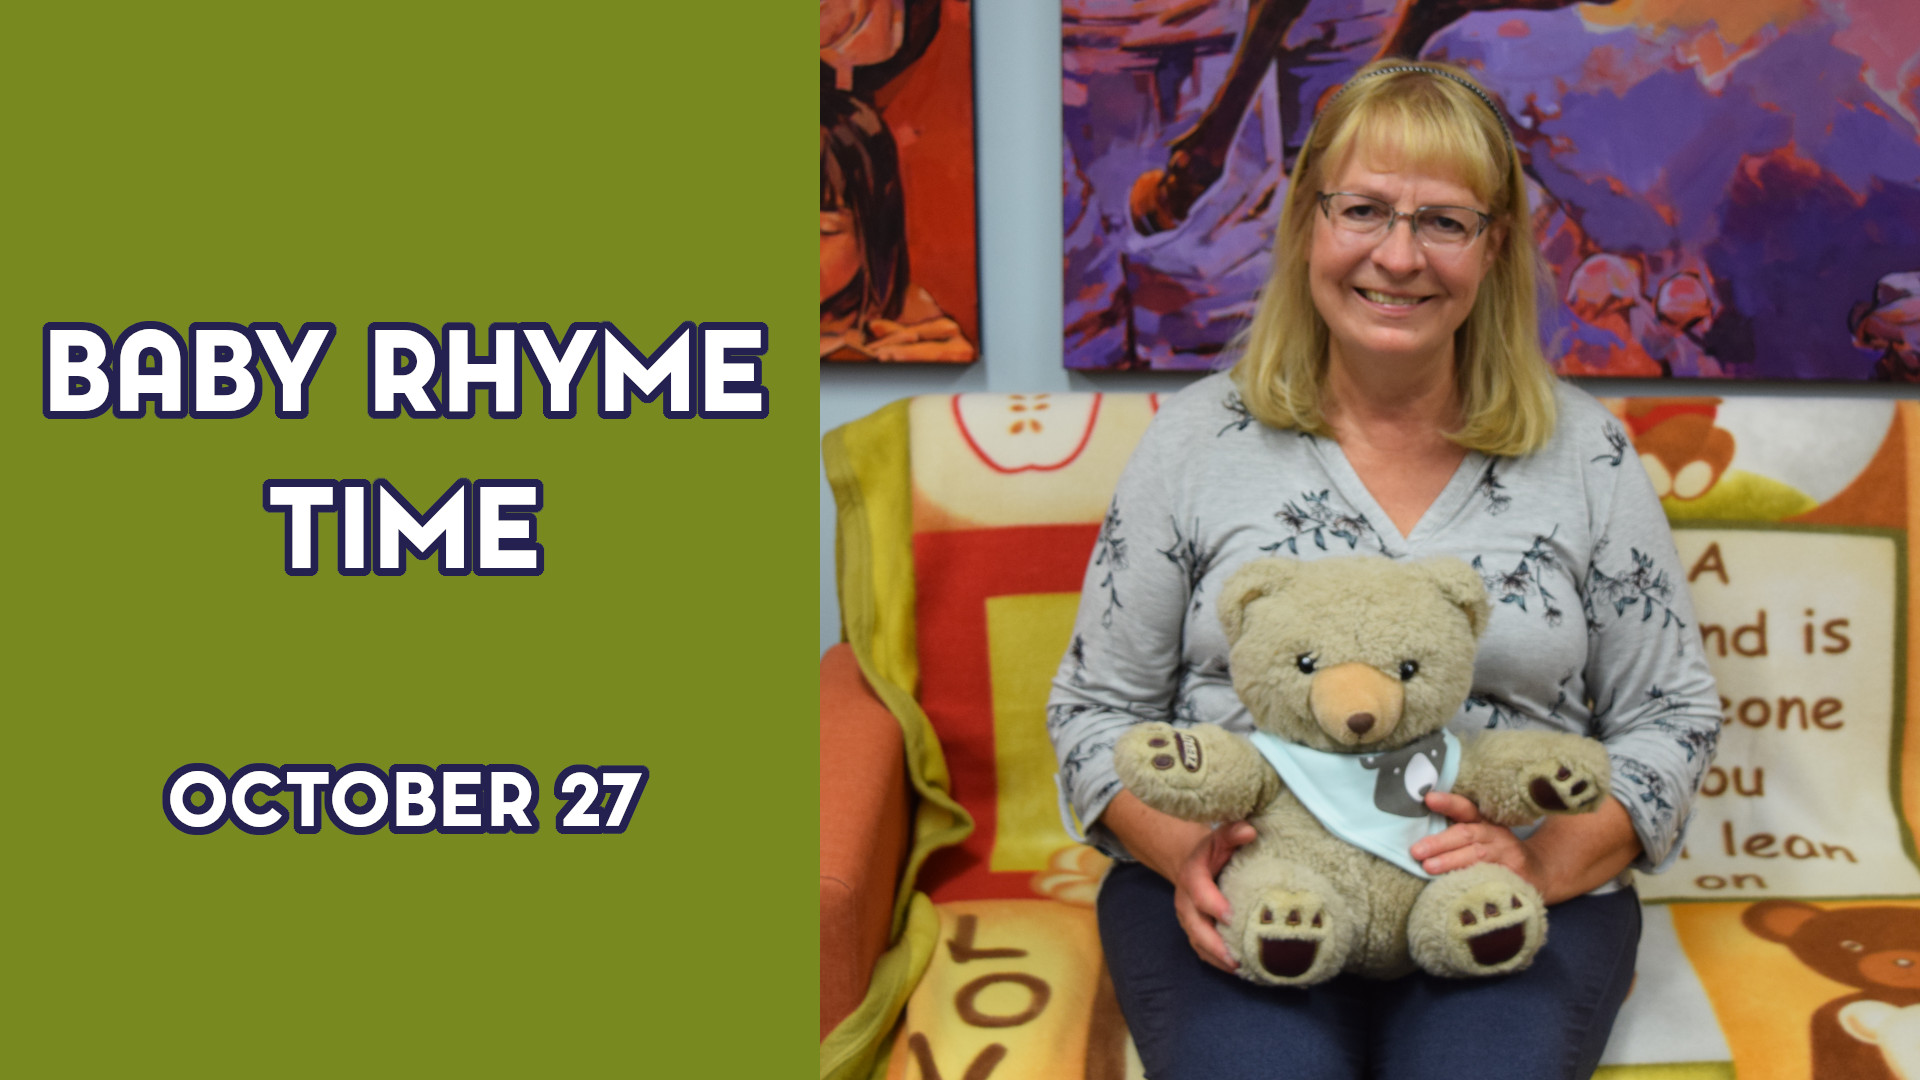 A woman holds stuffed animals next to the text "Baby Rhyme Time October 27"